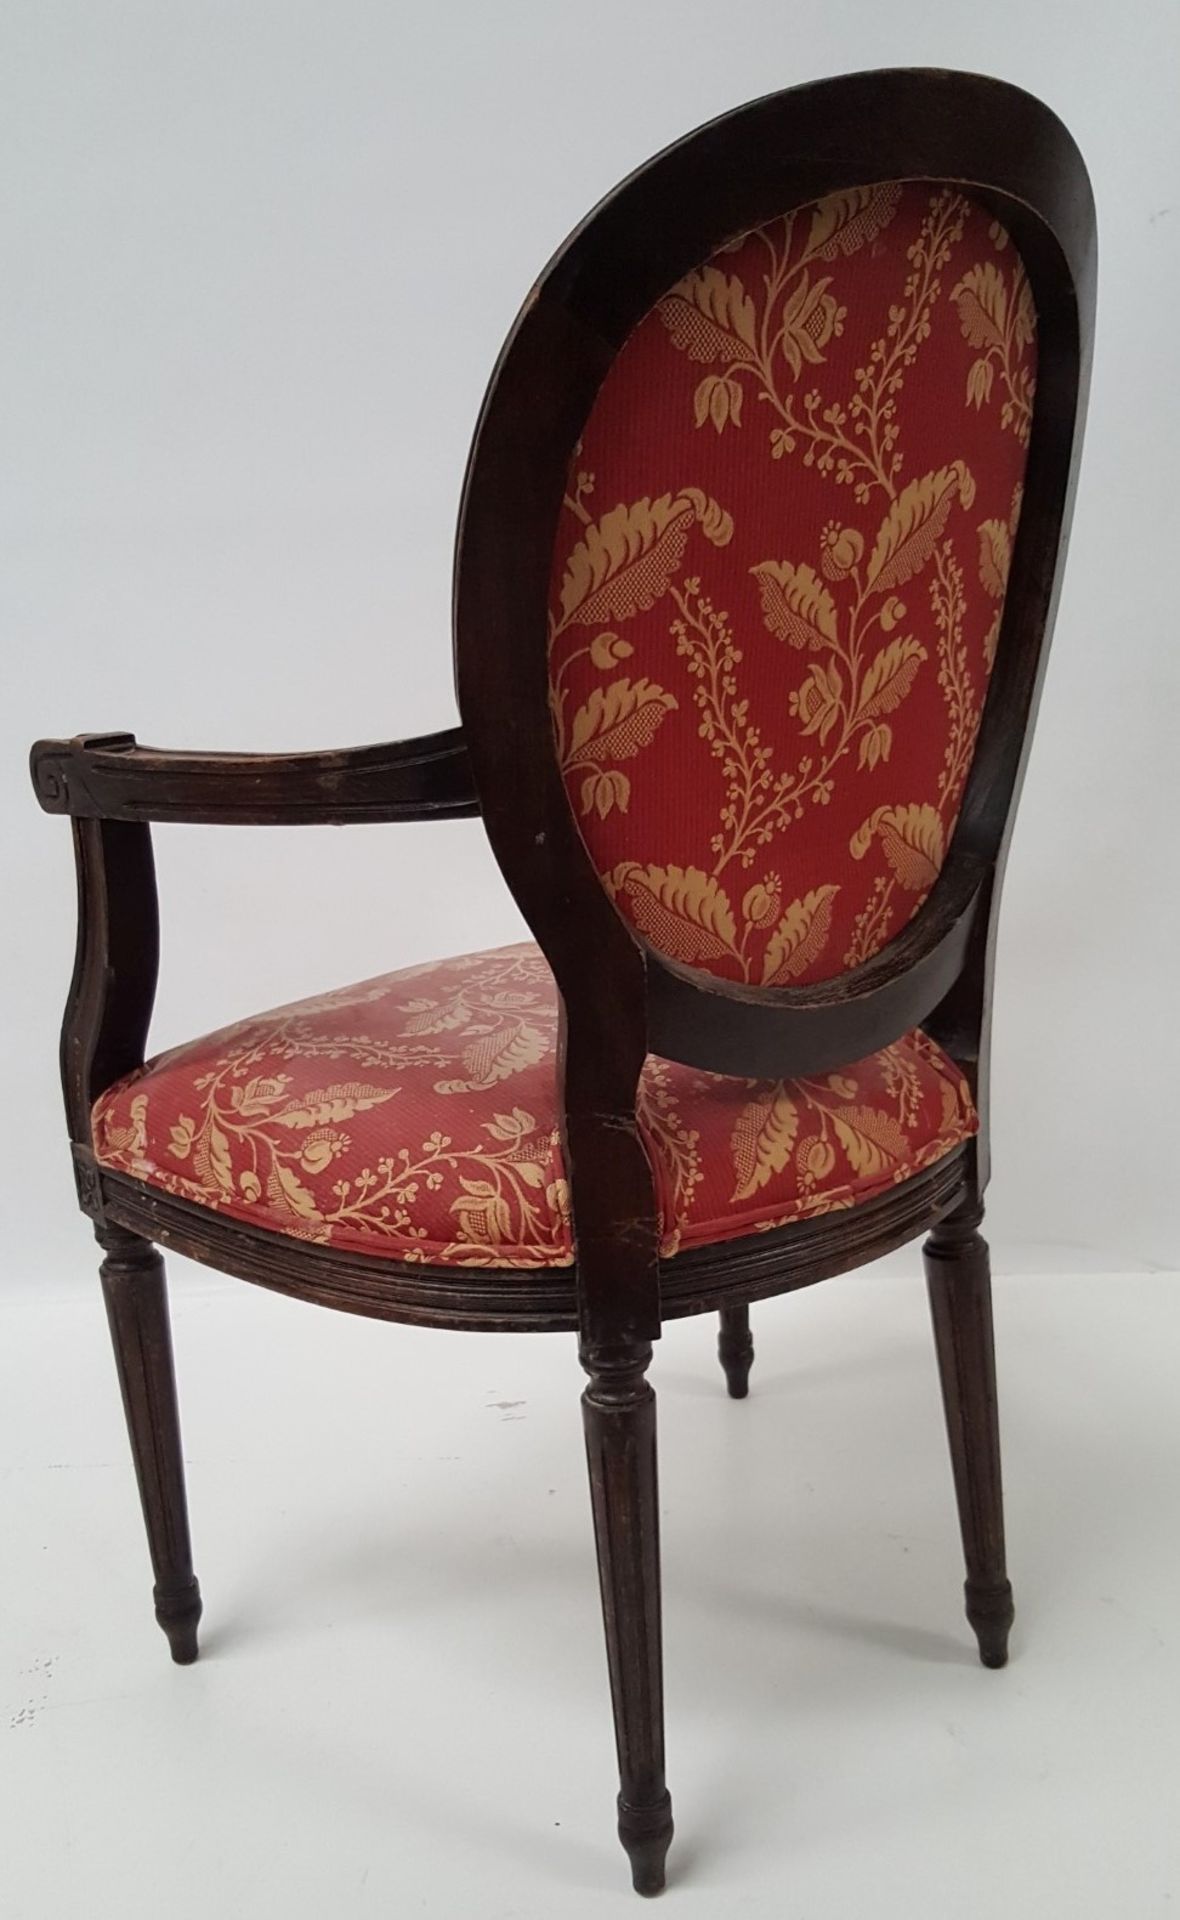 8 x Vintage Wooden Chairs Featuring Spindle Legs, And Upholstered In Red / Gold Floral Fabric - - Image 2 of 8